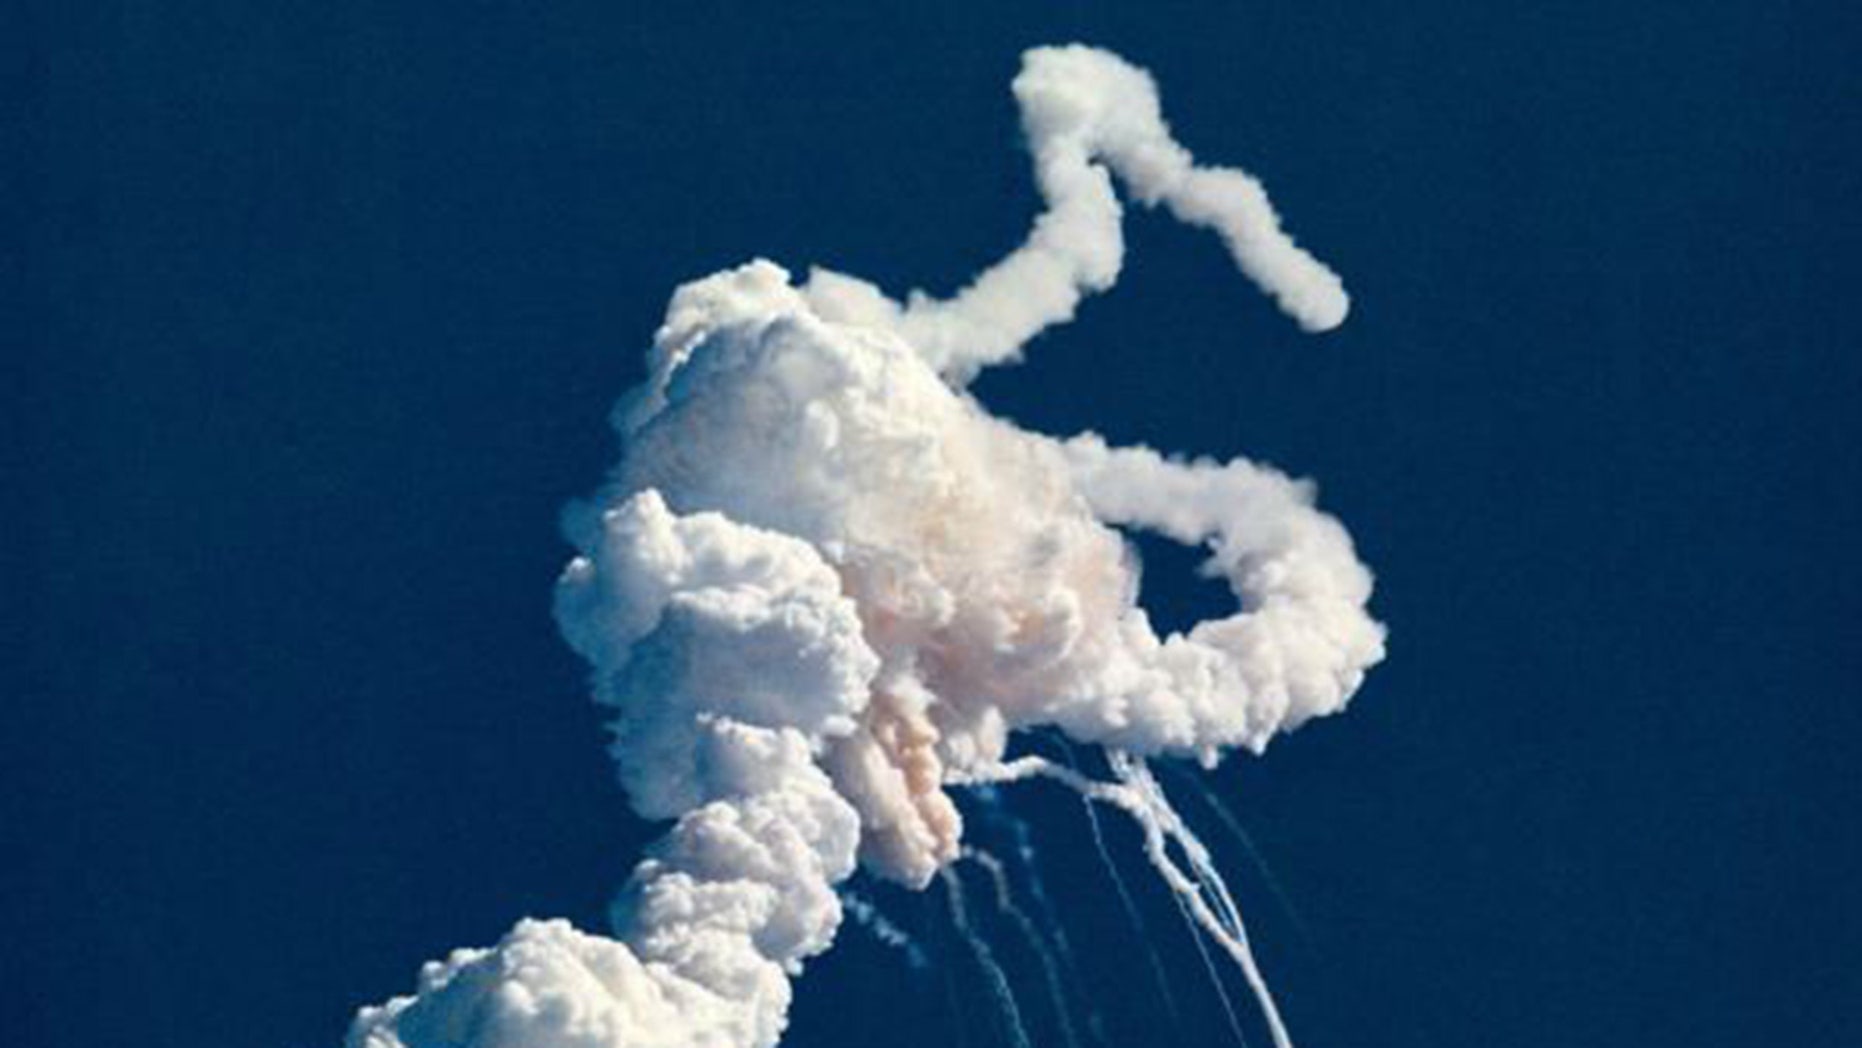 Challenger explosion among the deadliest space disasters